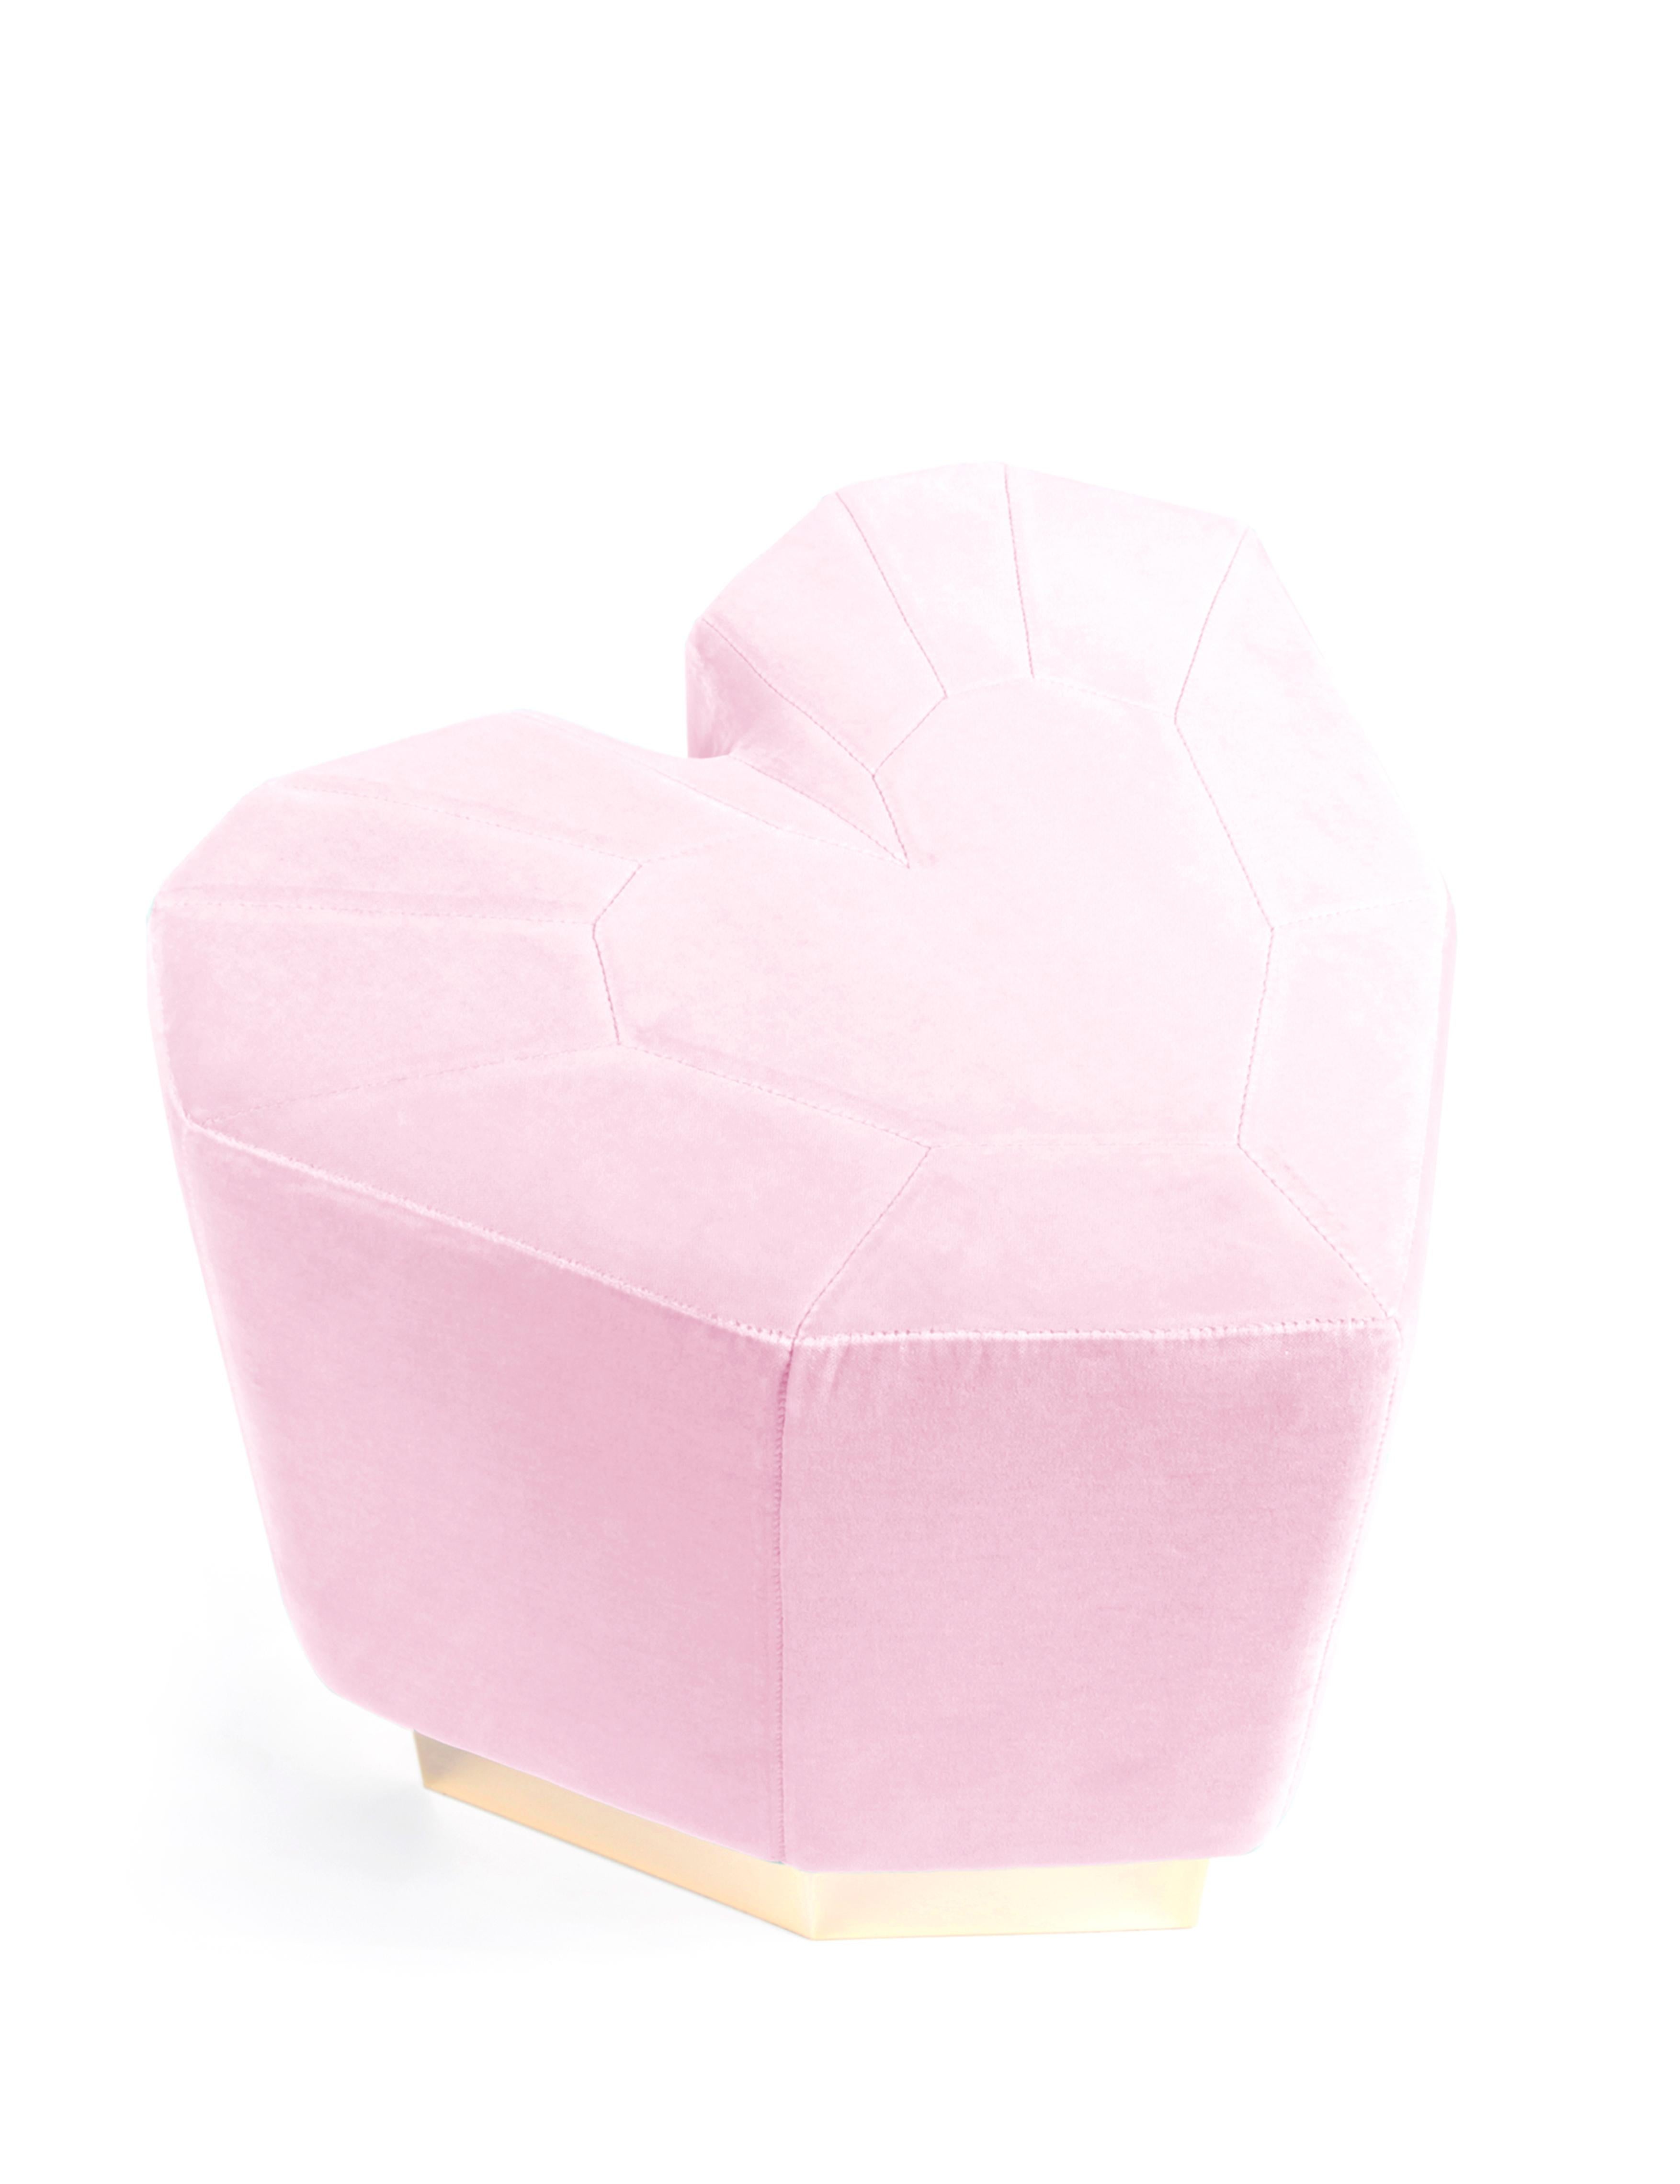 Contemporary Light Pink Queen Heart Stool by Royal Stranger